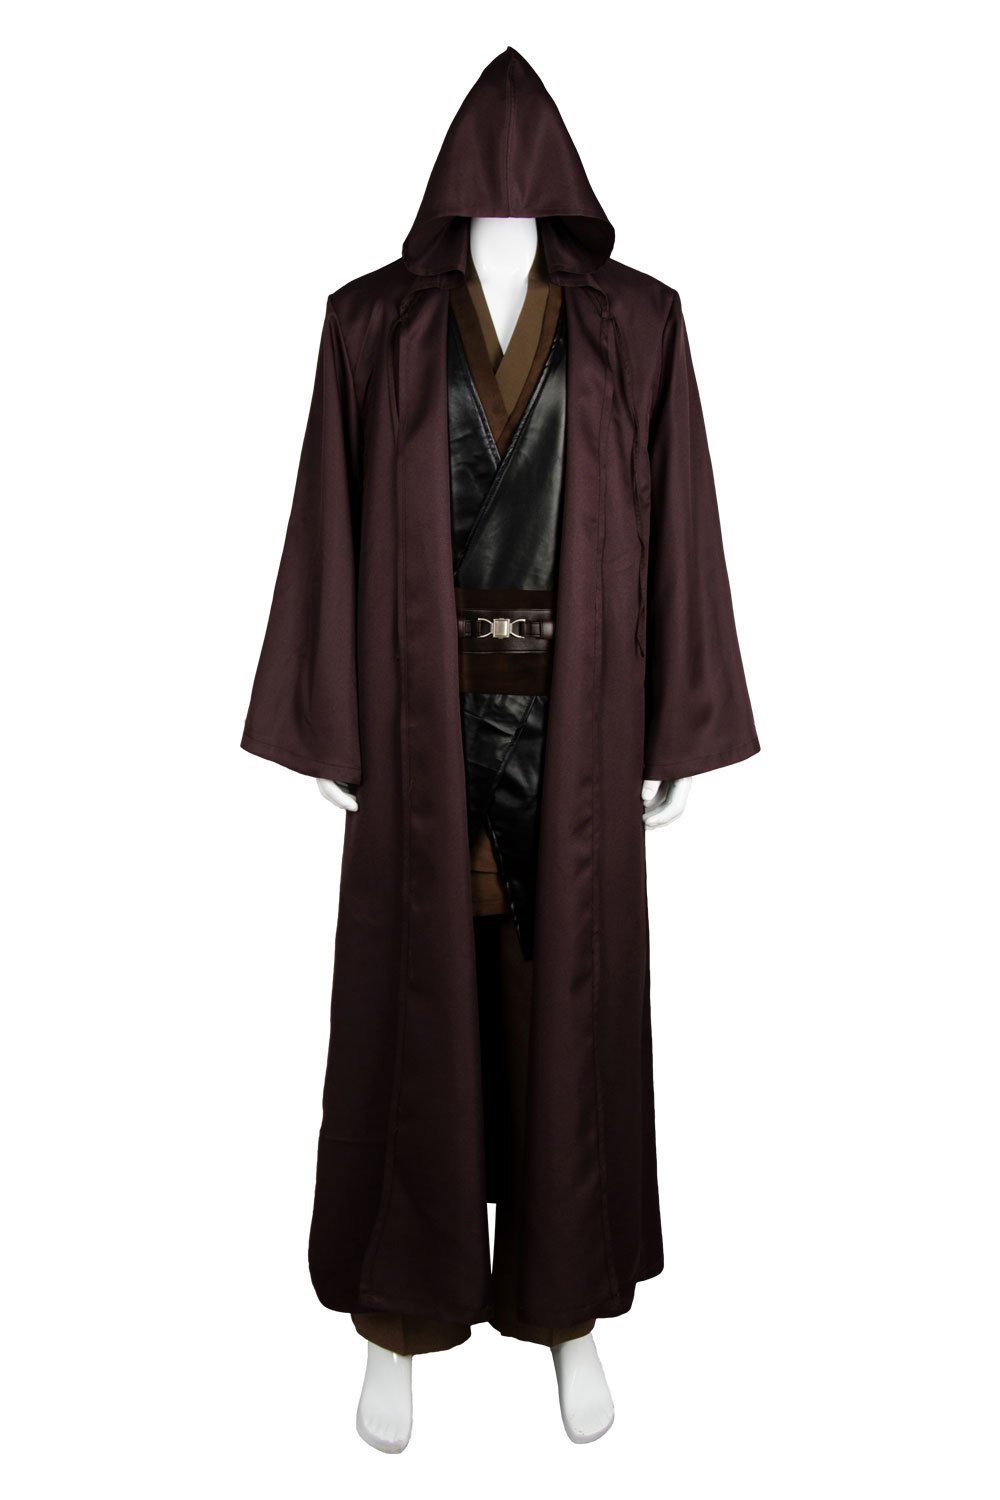 Star Wars Anakin Skywalker Jedi Costume Outfit Robe Halloween Carnival Suit Cosplay Costume